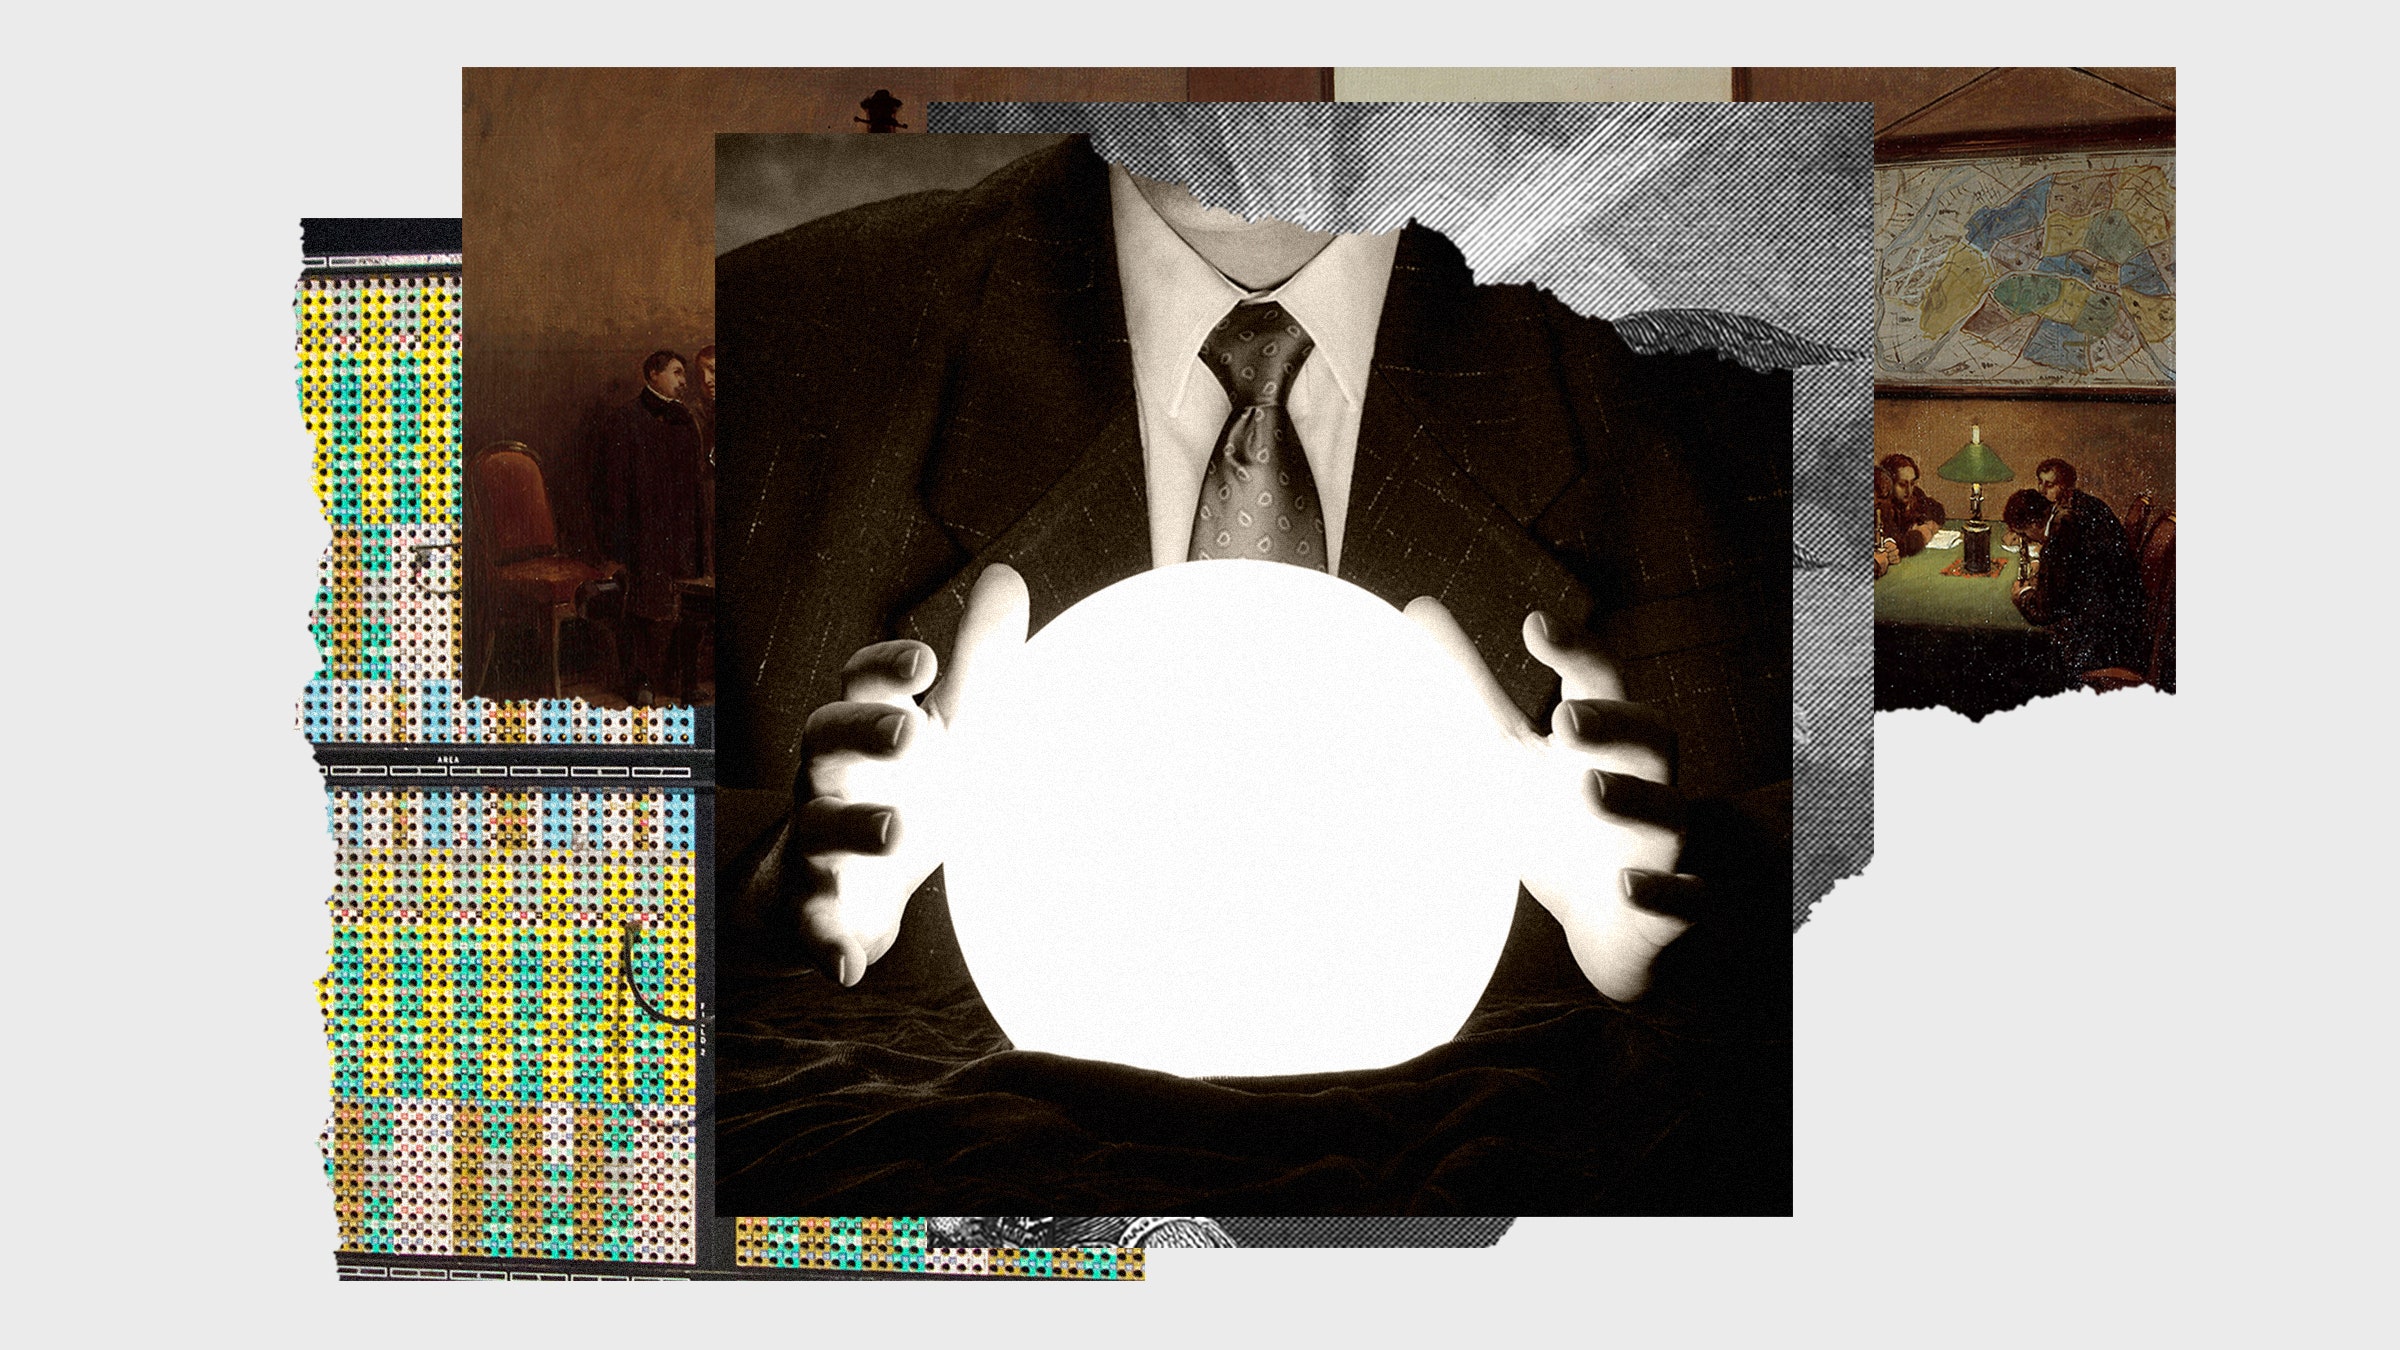 Collage of images of business person in suit reading glowing orb circuit boards.